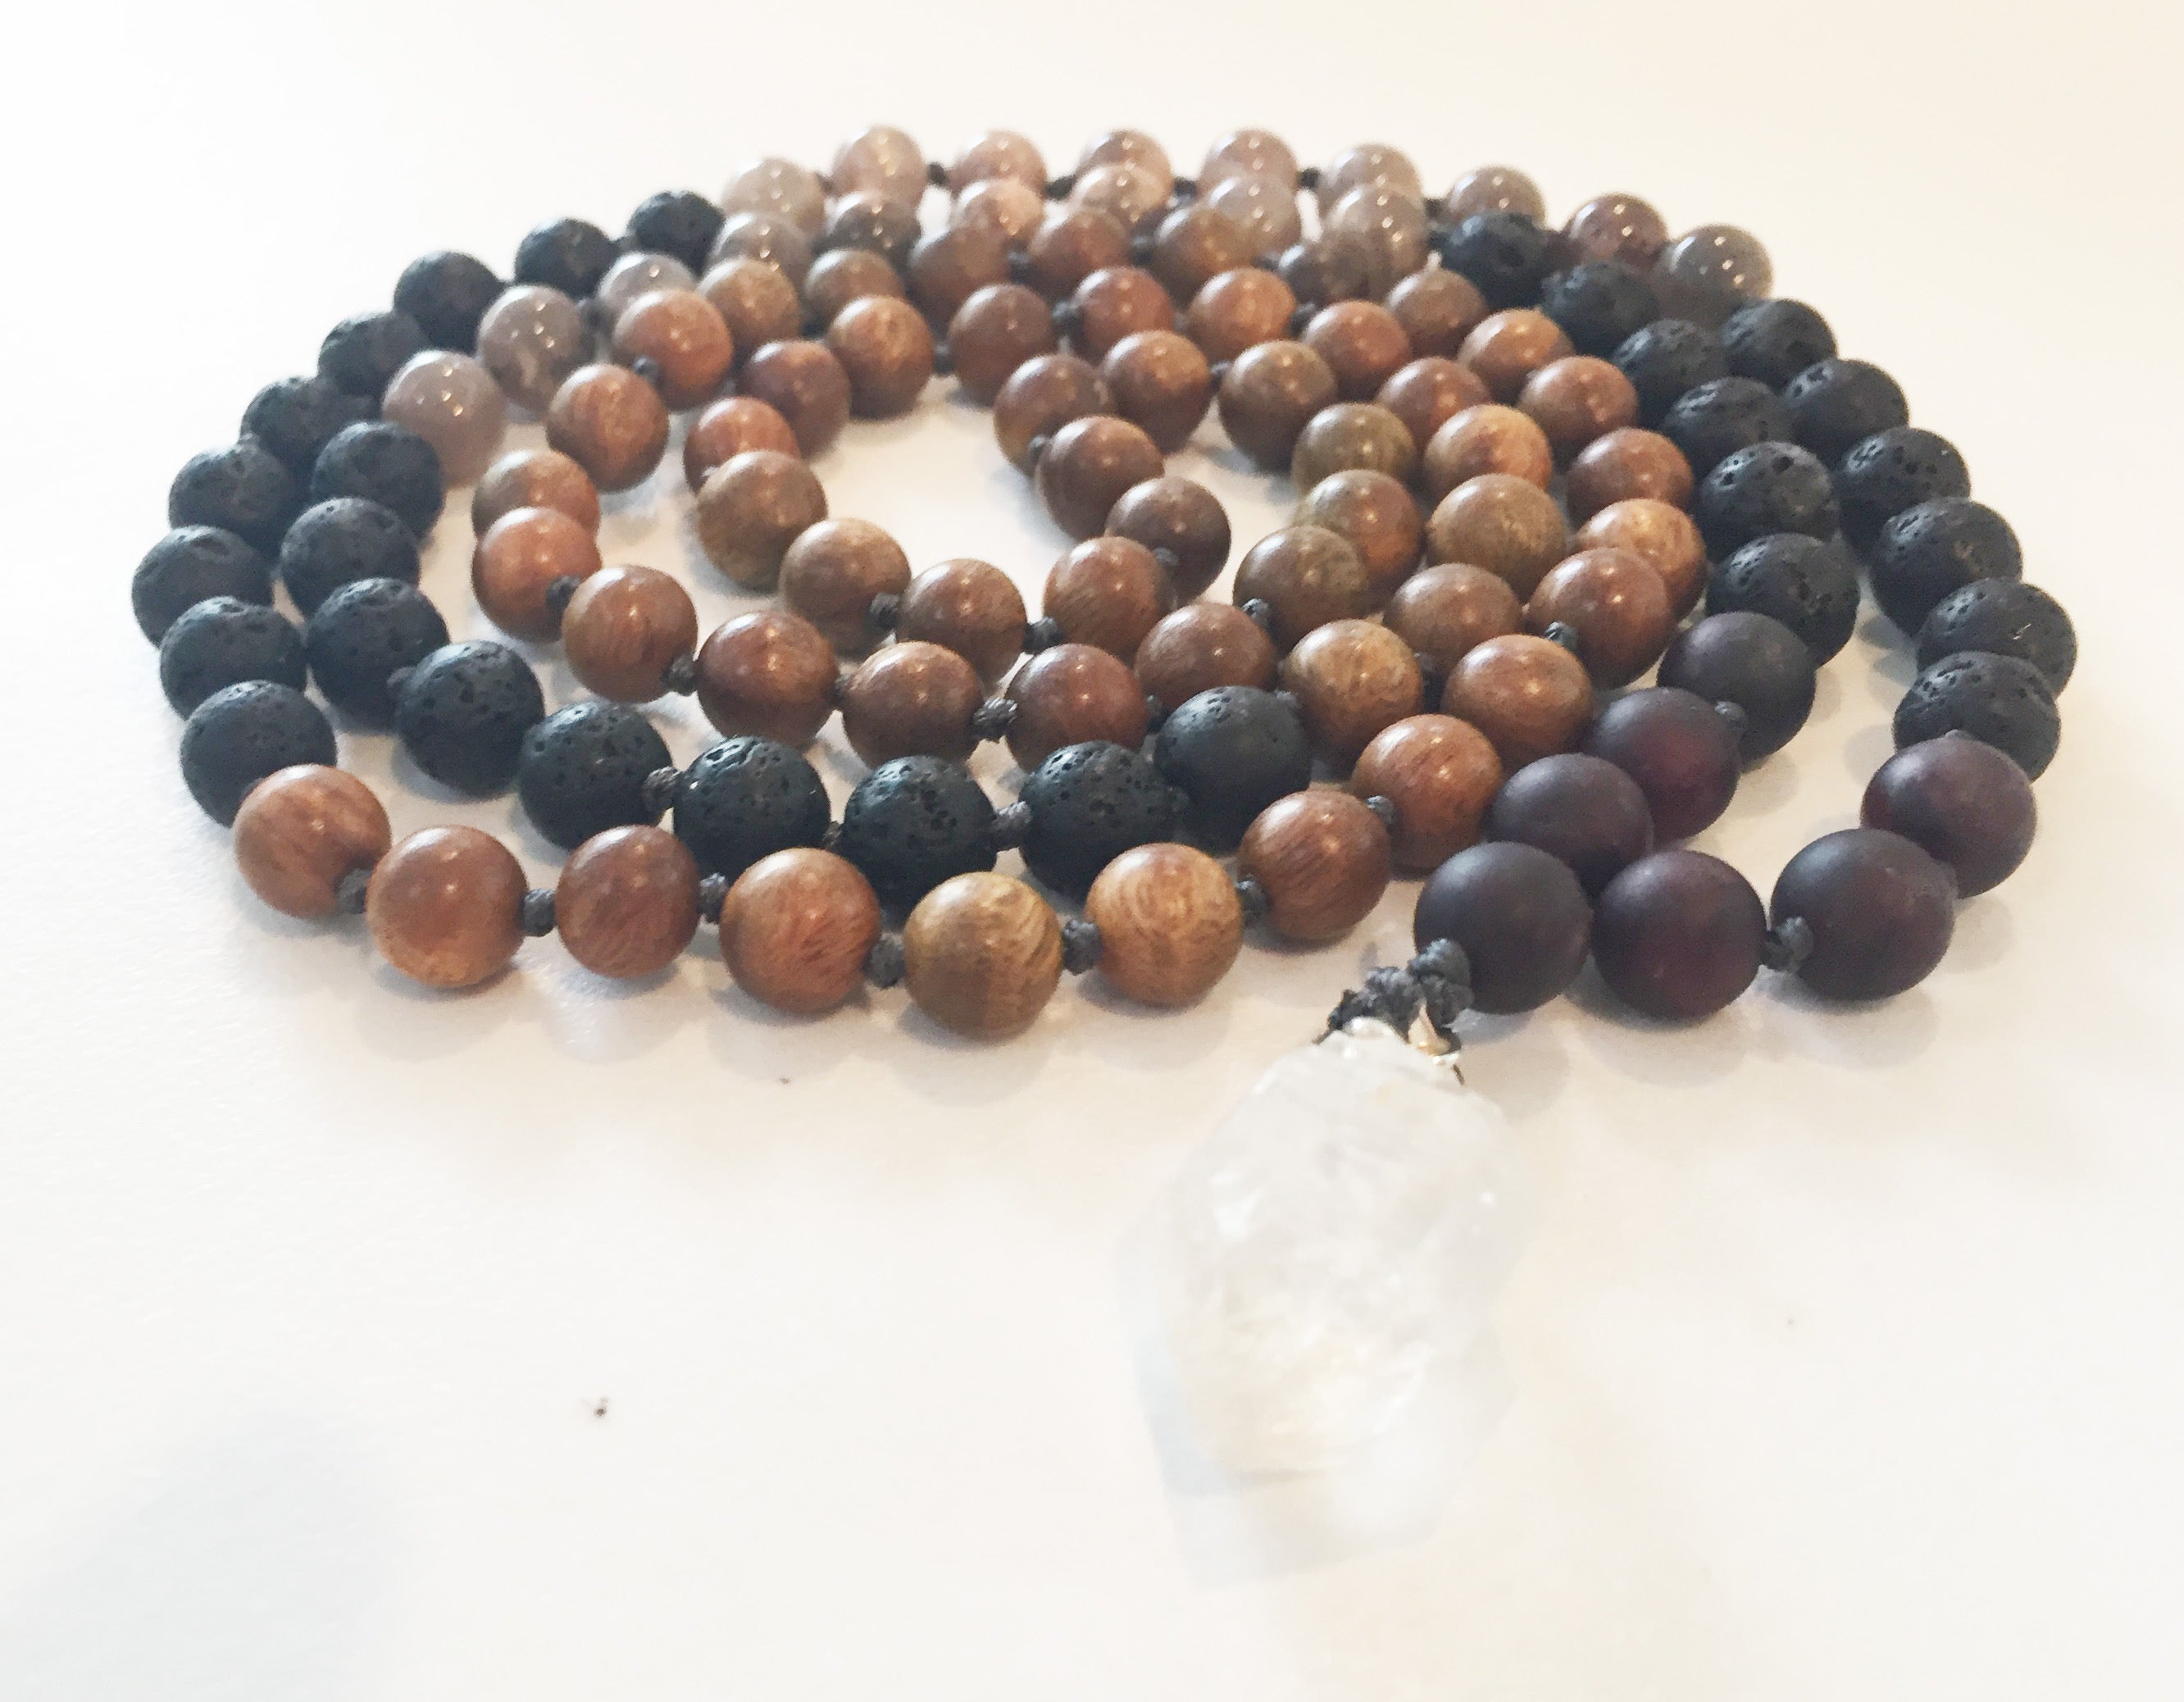 8mm Green Sandalwood & Grey Sunstone 108 Knotted Mala Necklace with Crystal Pendant